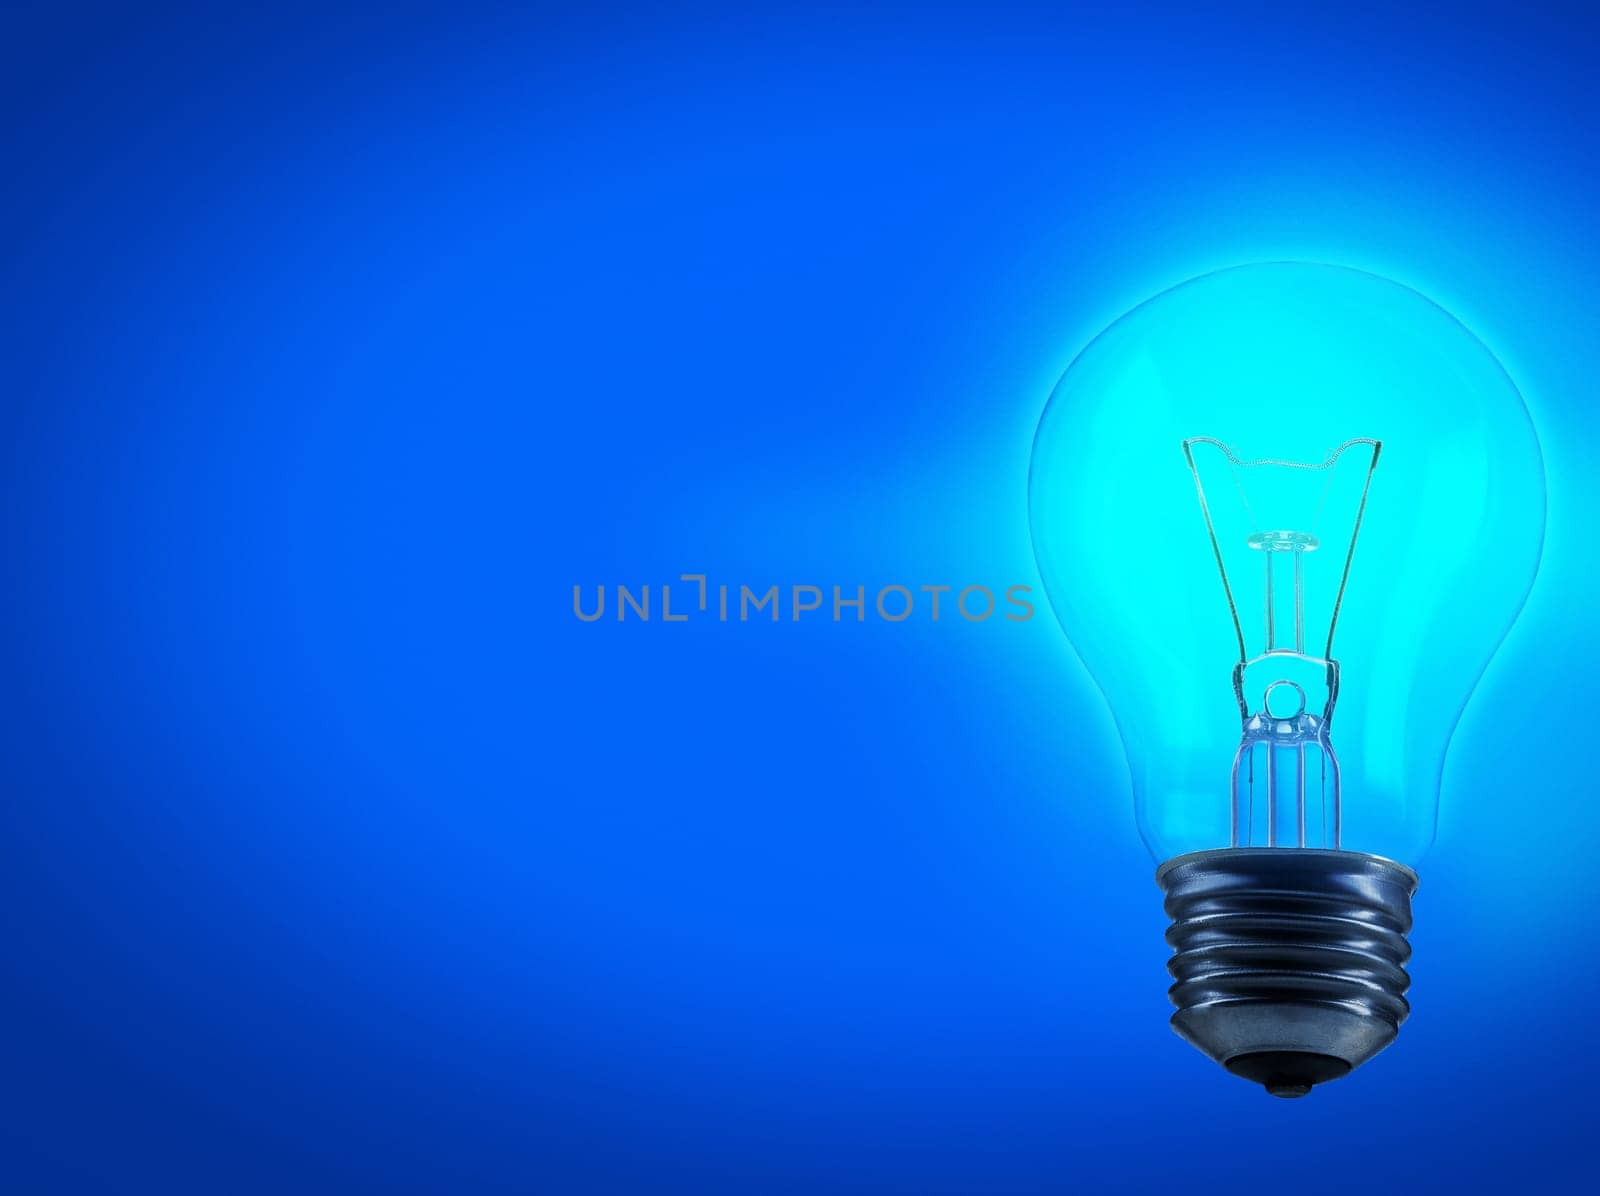 Lightbulb, energy and electricity in studio for idea with mockup space for inspiration, solution or genius thought. Power, glow light and science for knowledge or creative thinking on blue background.